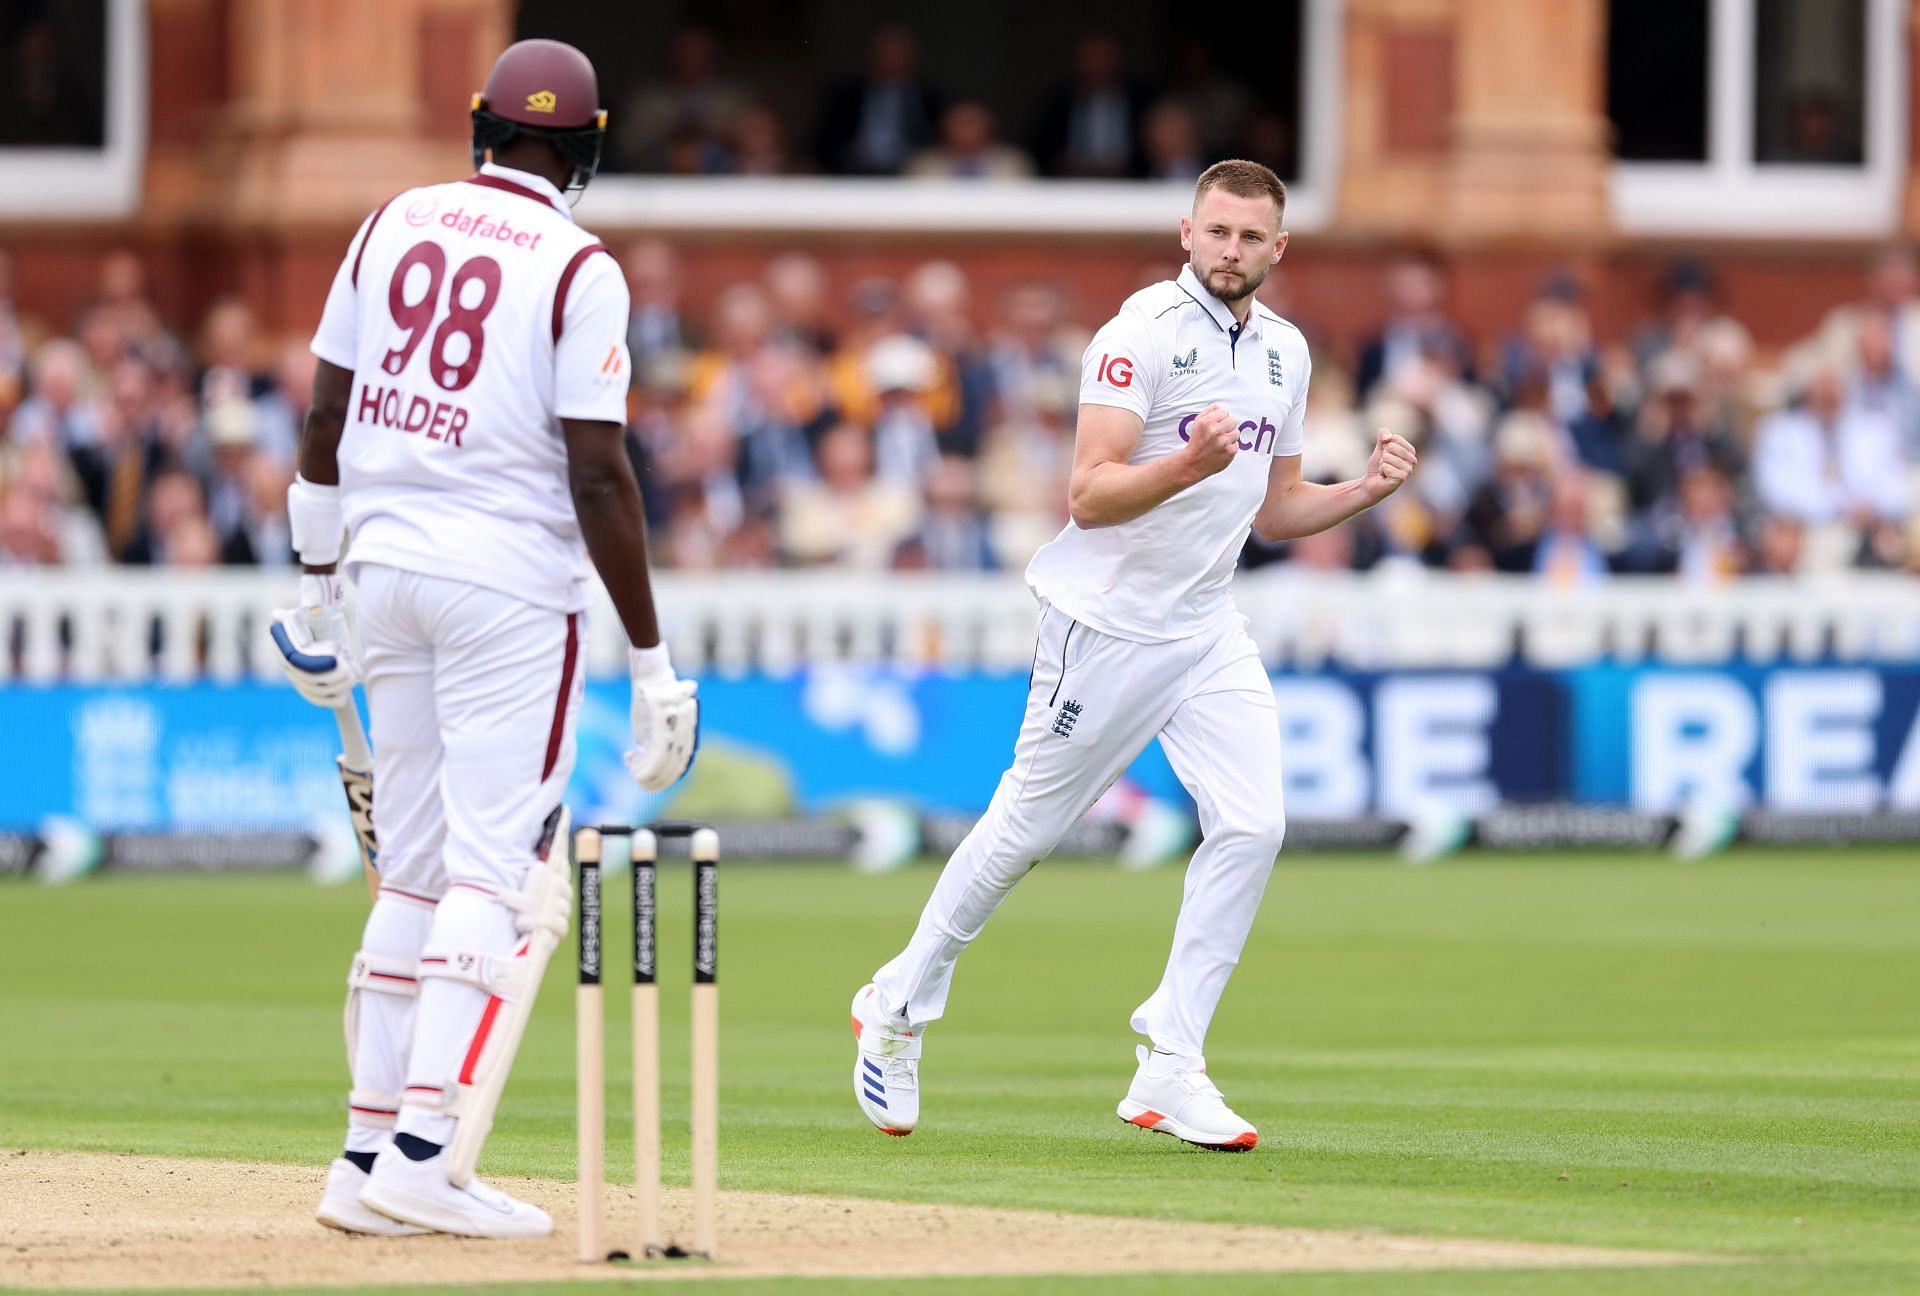 [Watch] Gus Atkinson takes 3 wickets in 4 balls to register a fifer on day 1 of ENG vs WI 1st Test